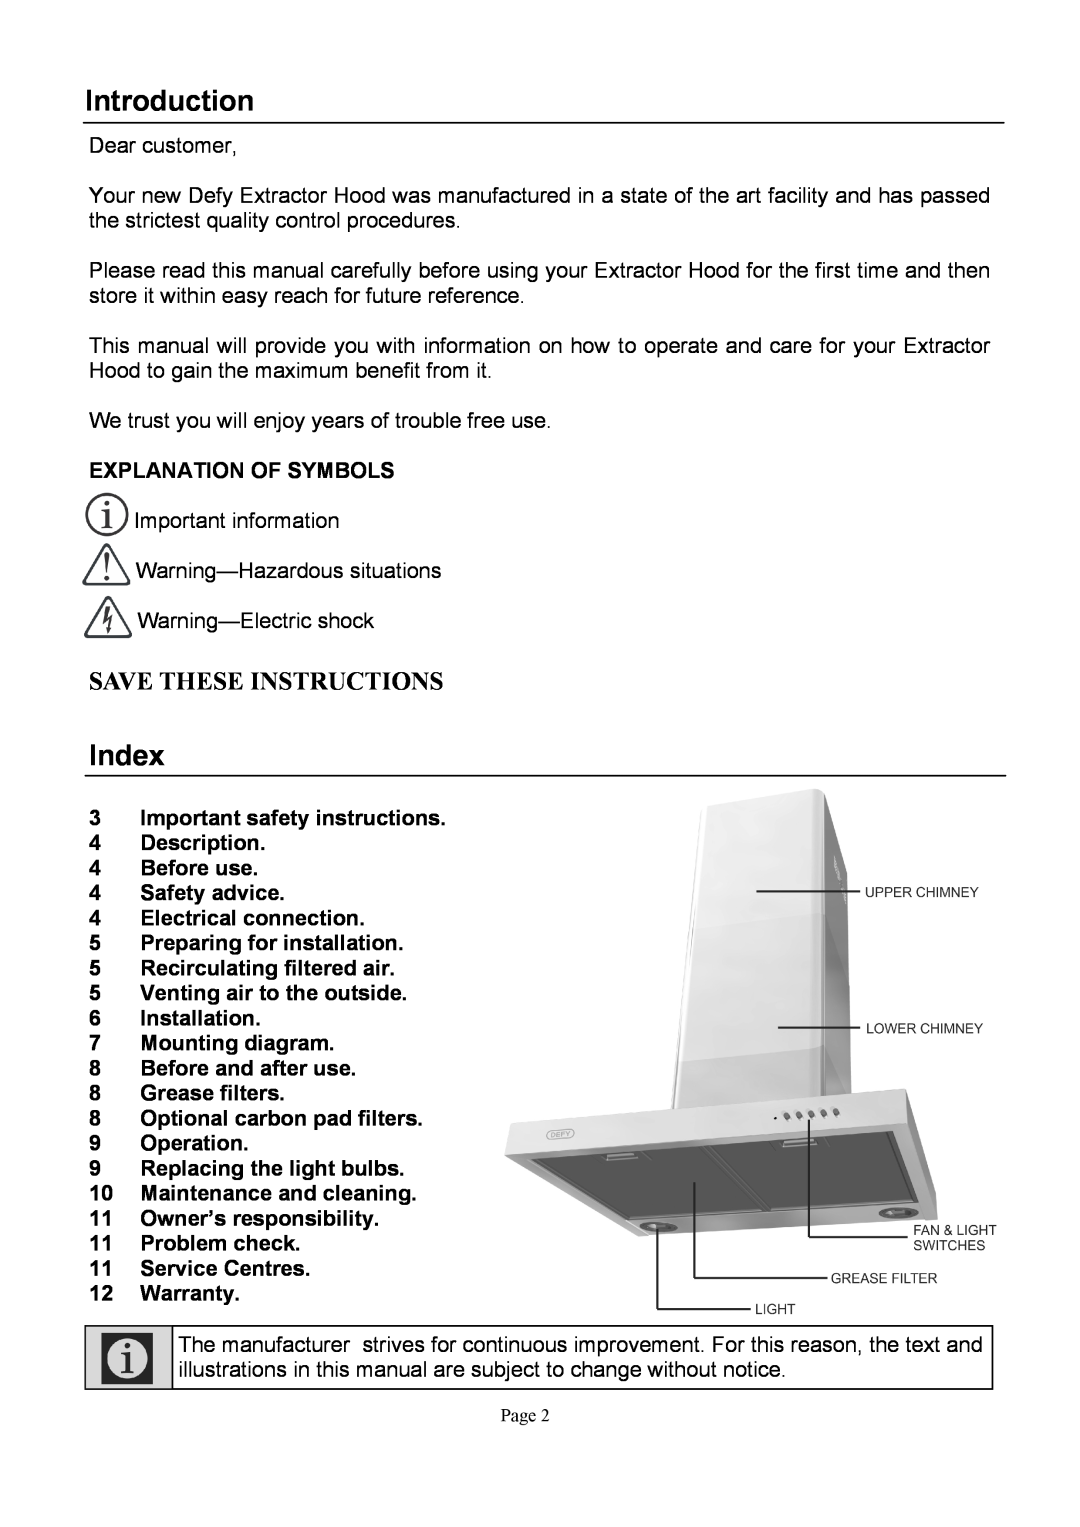 Defy Appliances DCH303, DCH304, DCH299 user manual Introduction, Index, Save These Instructions 